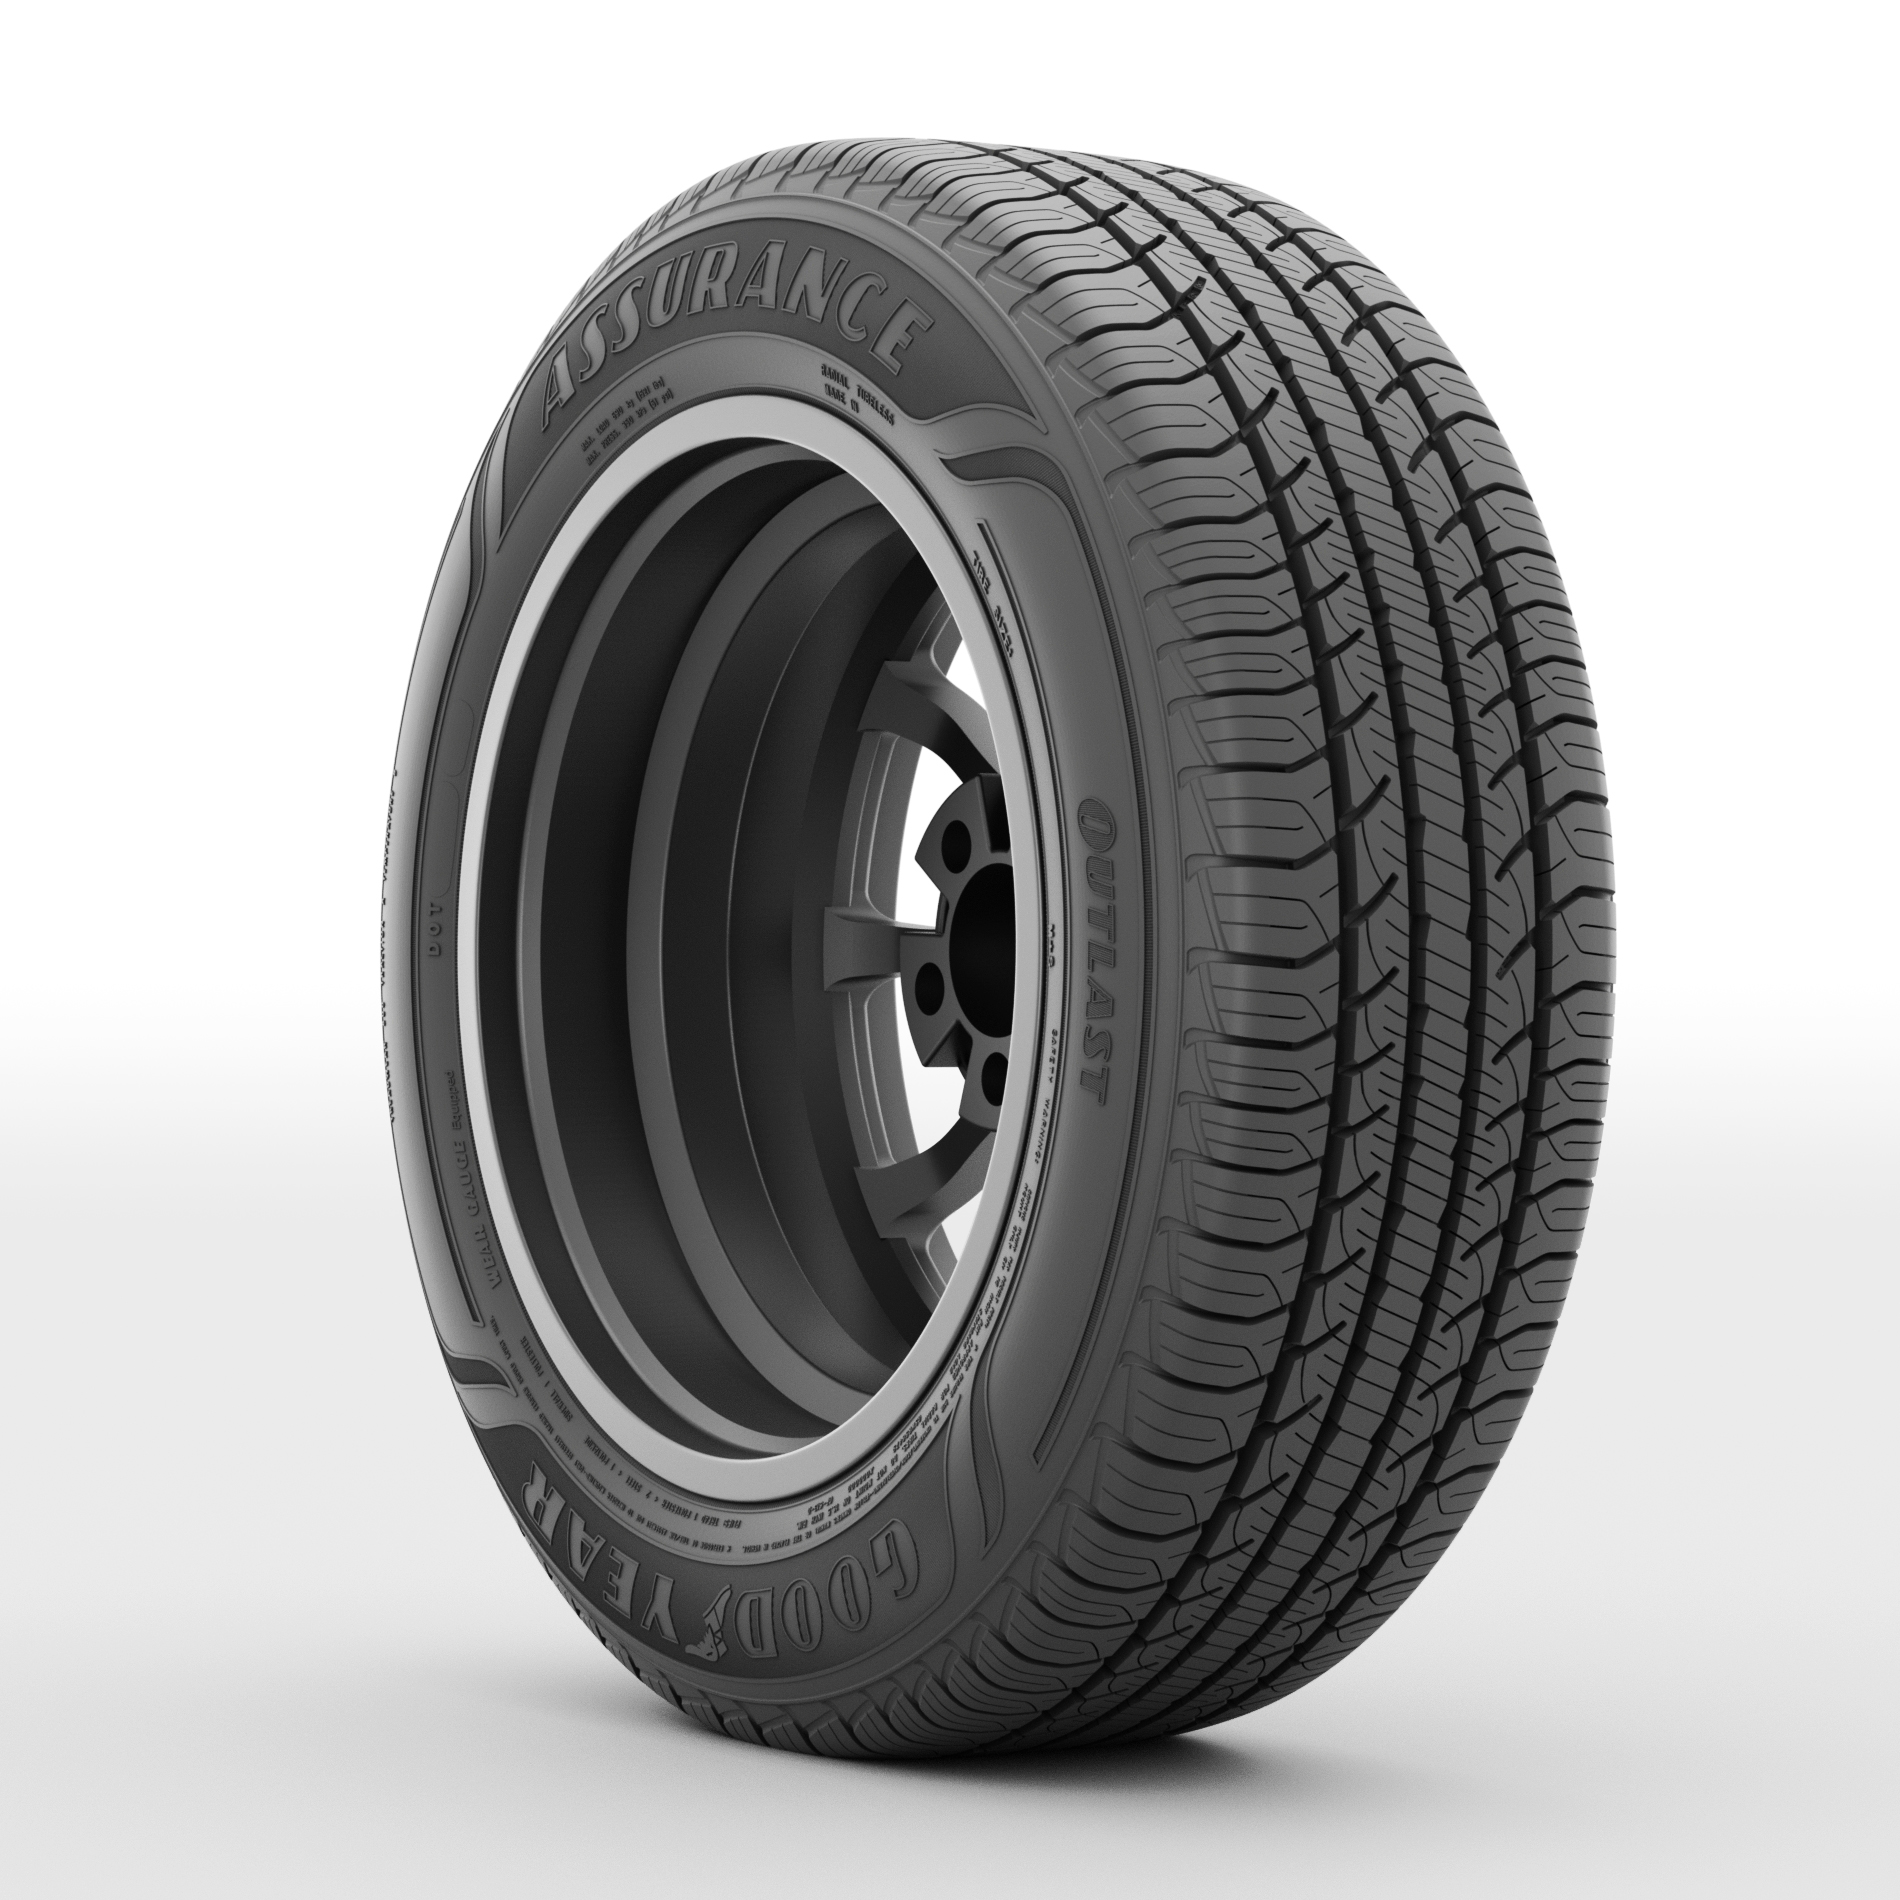 205/55 R16 - Buy 205/55 R16 Tyres Online starting at $82.00